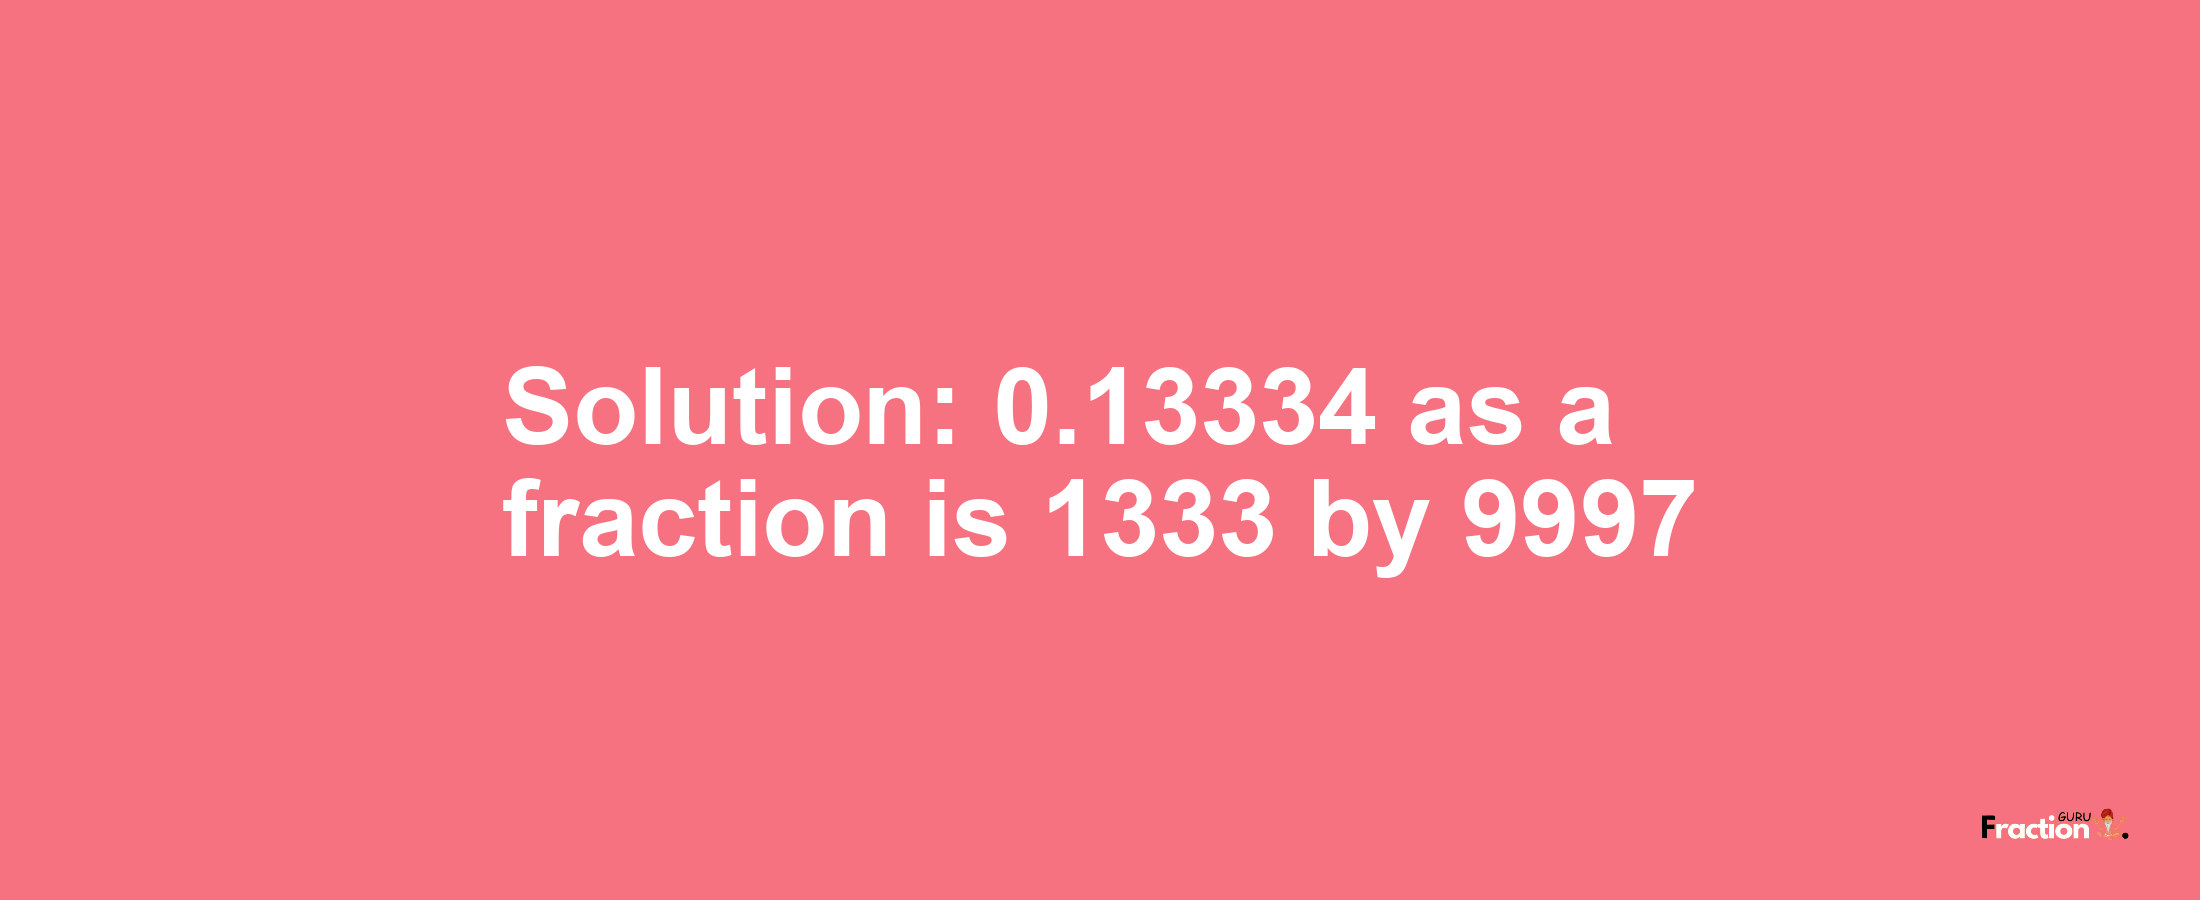 Solution:0.13334 as a fraction is 1333/9997